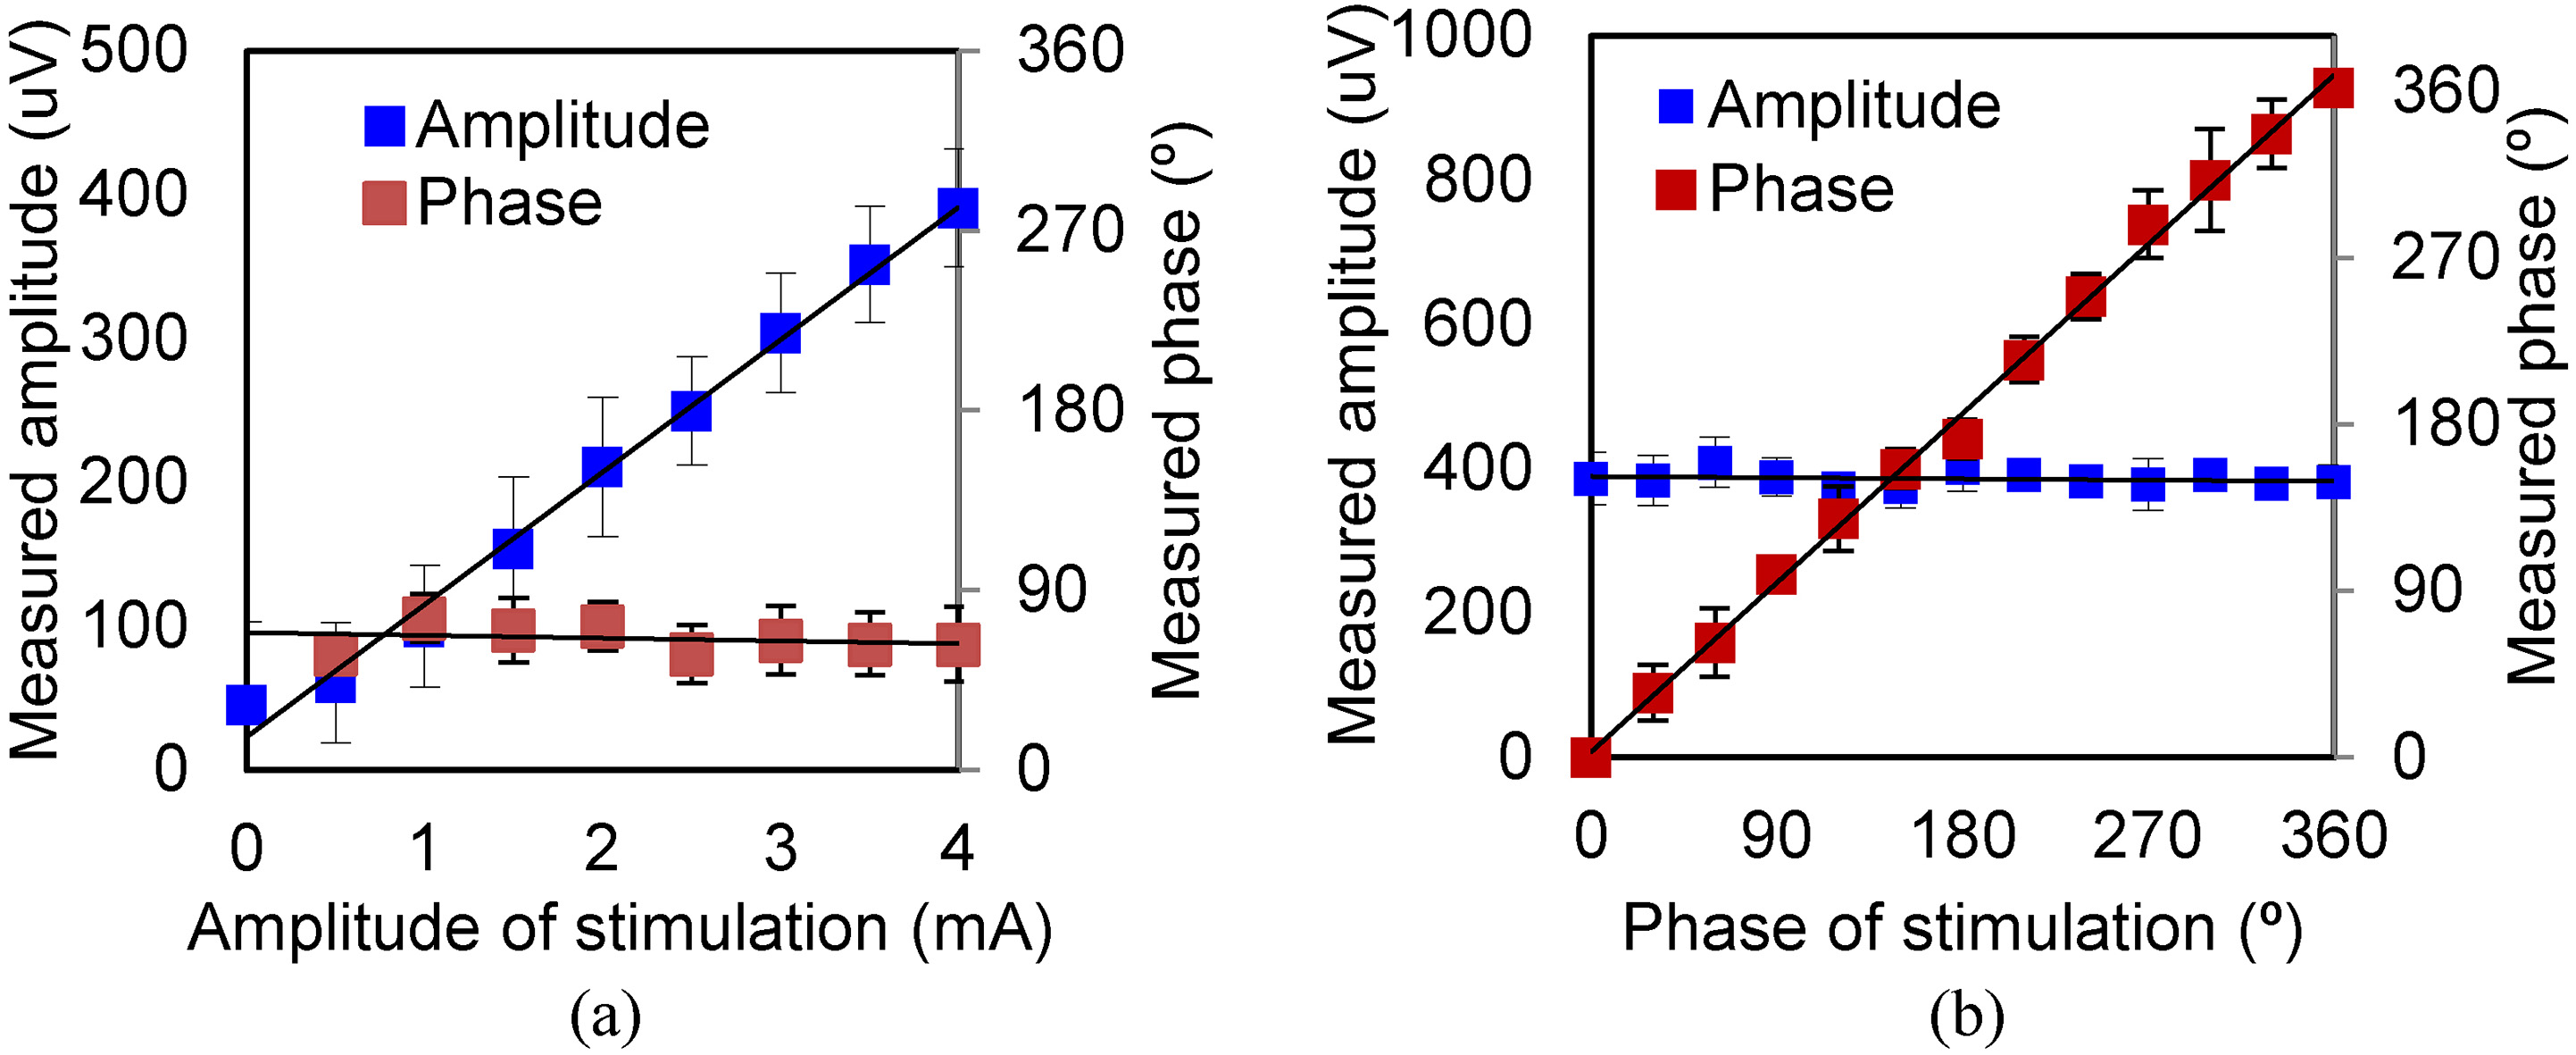 Amplitude and phase of MA signal under various levels of excitation (square wave). (a) Results for various exciting amplitudes. (b) Results for various exciting phases. 